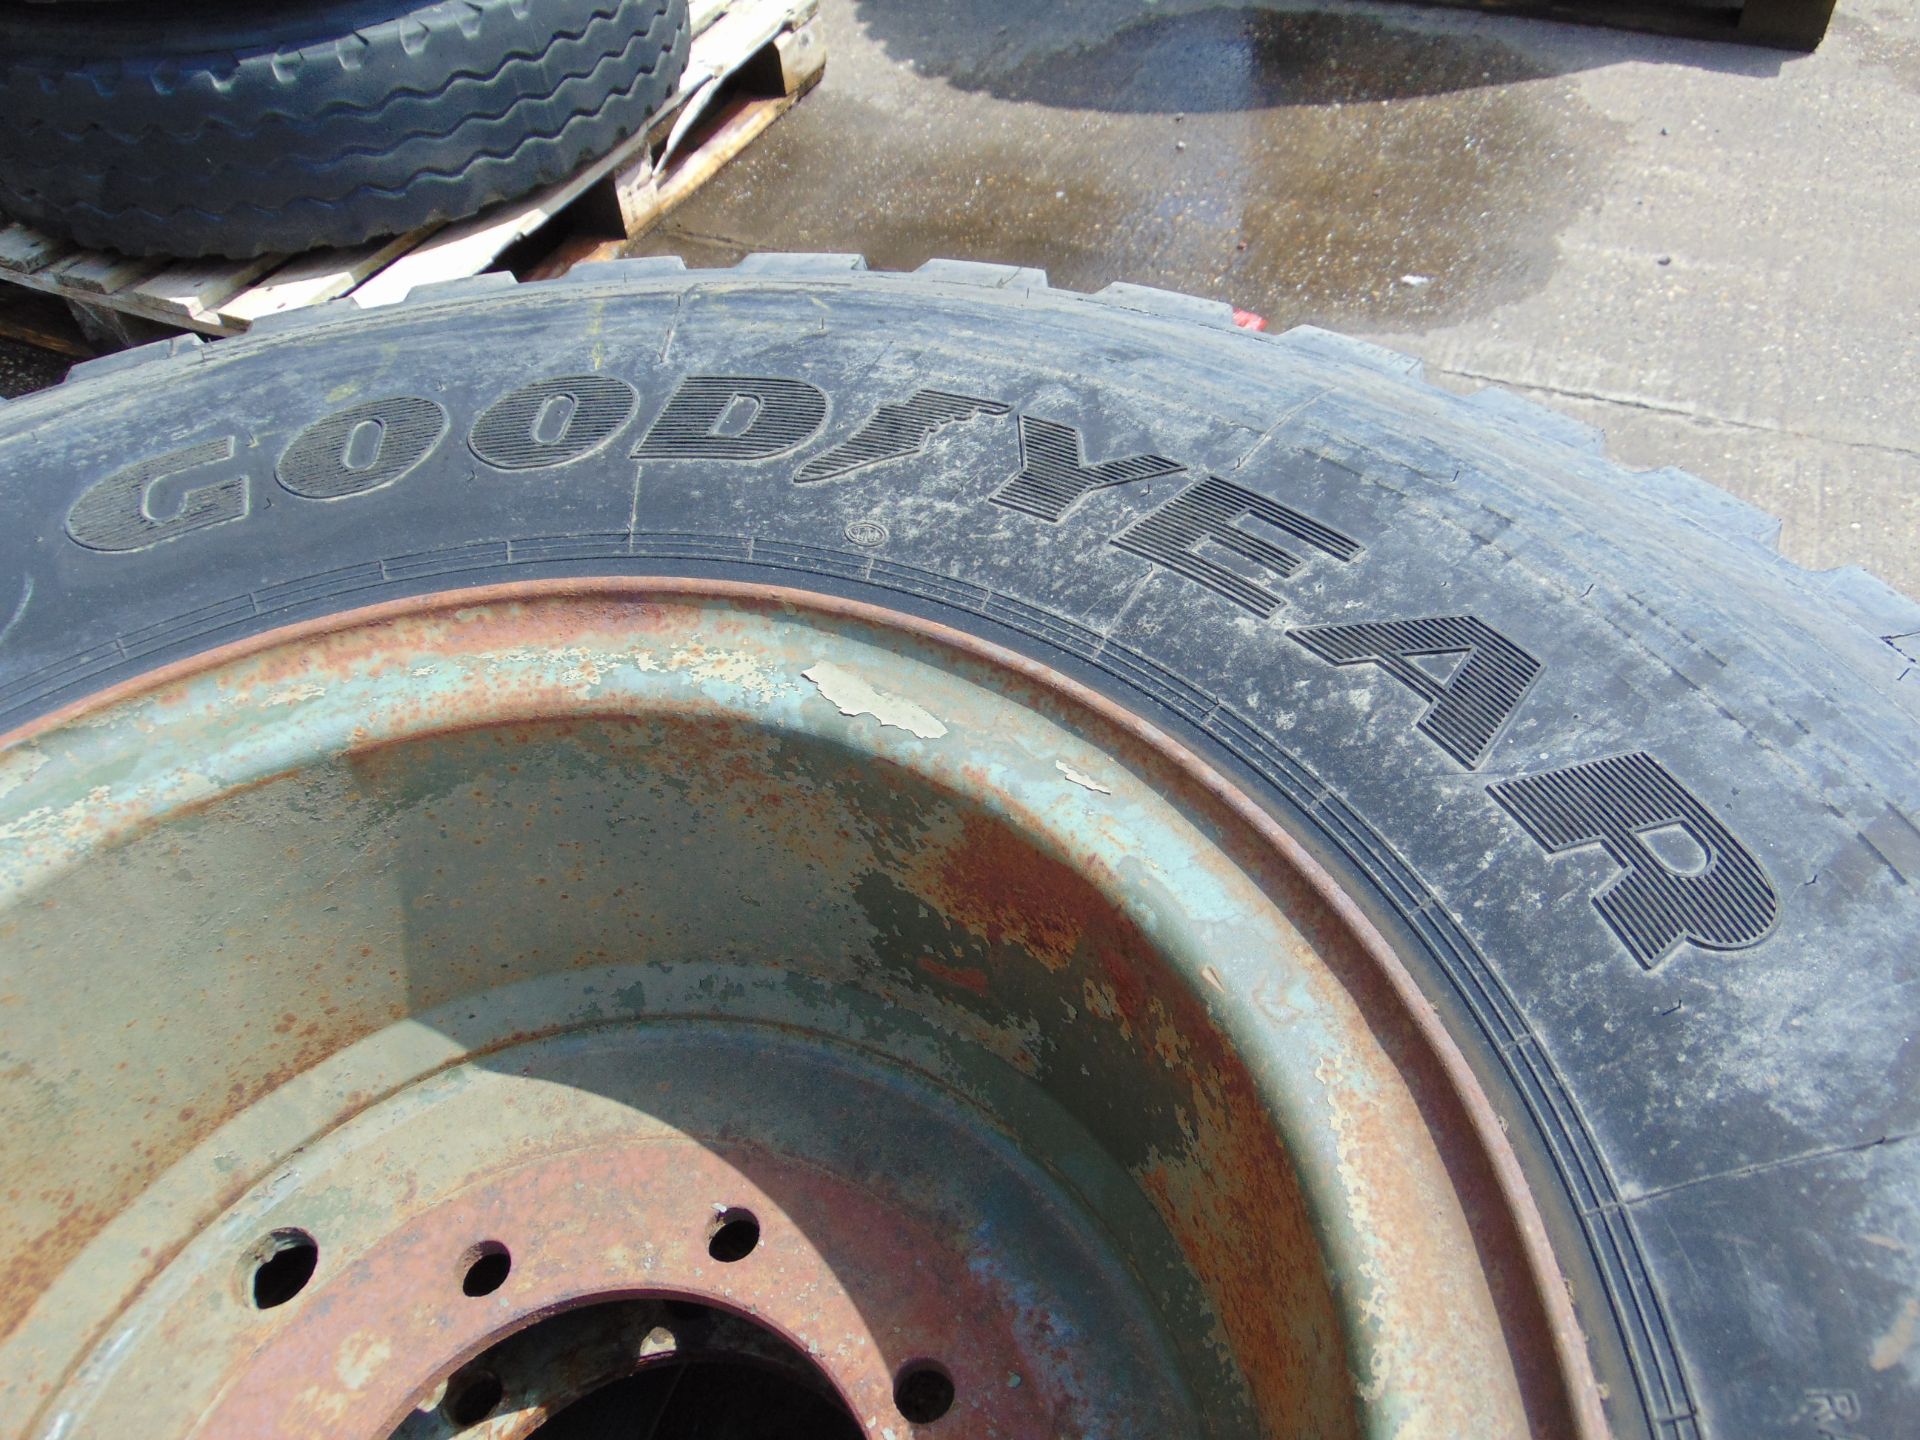 2x Goodyear G388 12.00 R20 Tyres on 8 Stud Rims - Image 5 of 7